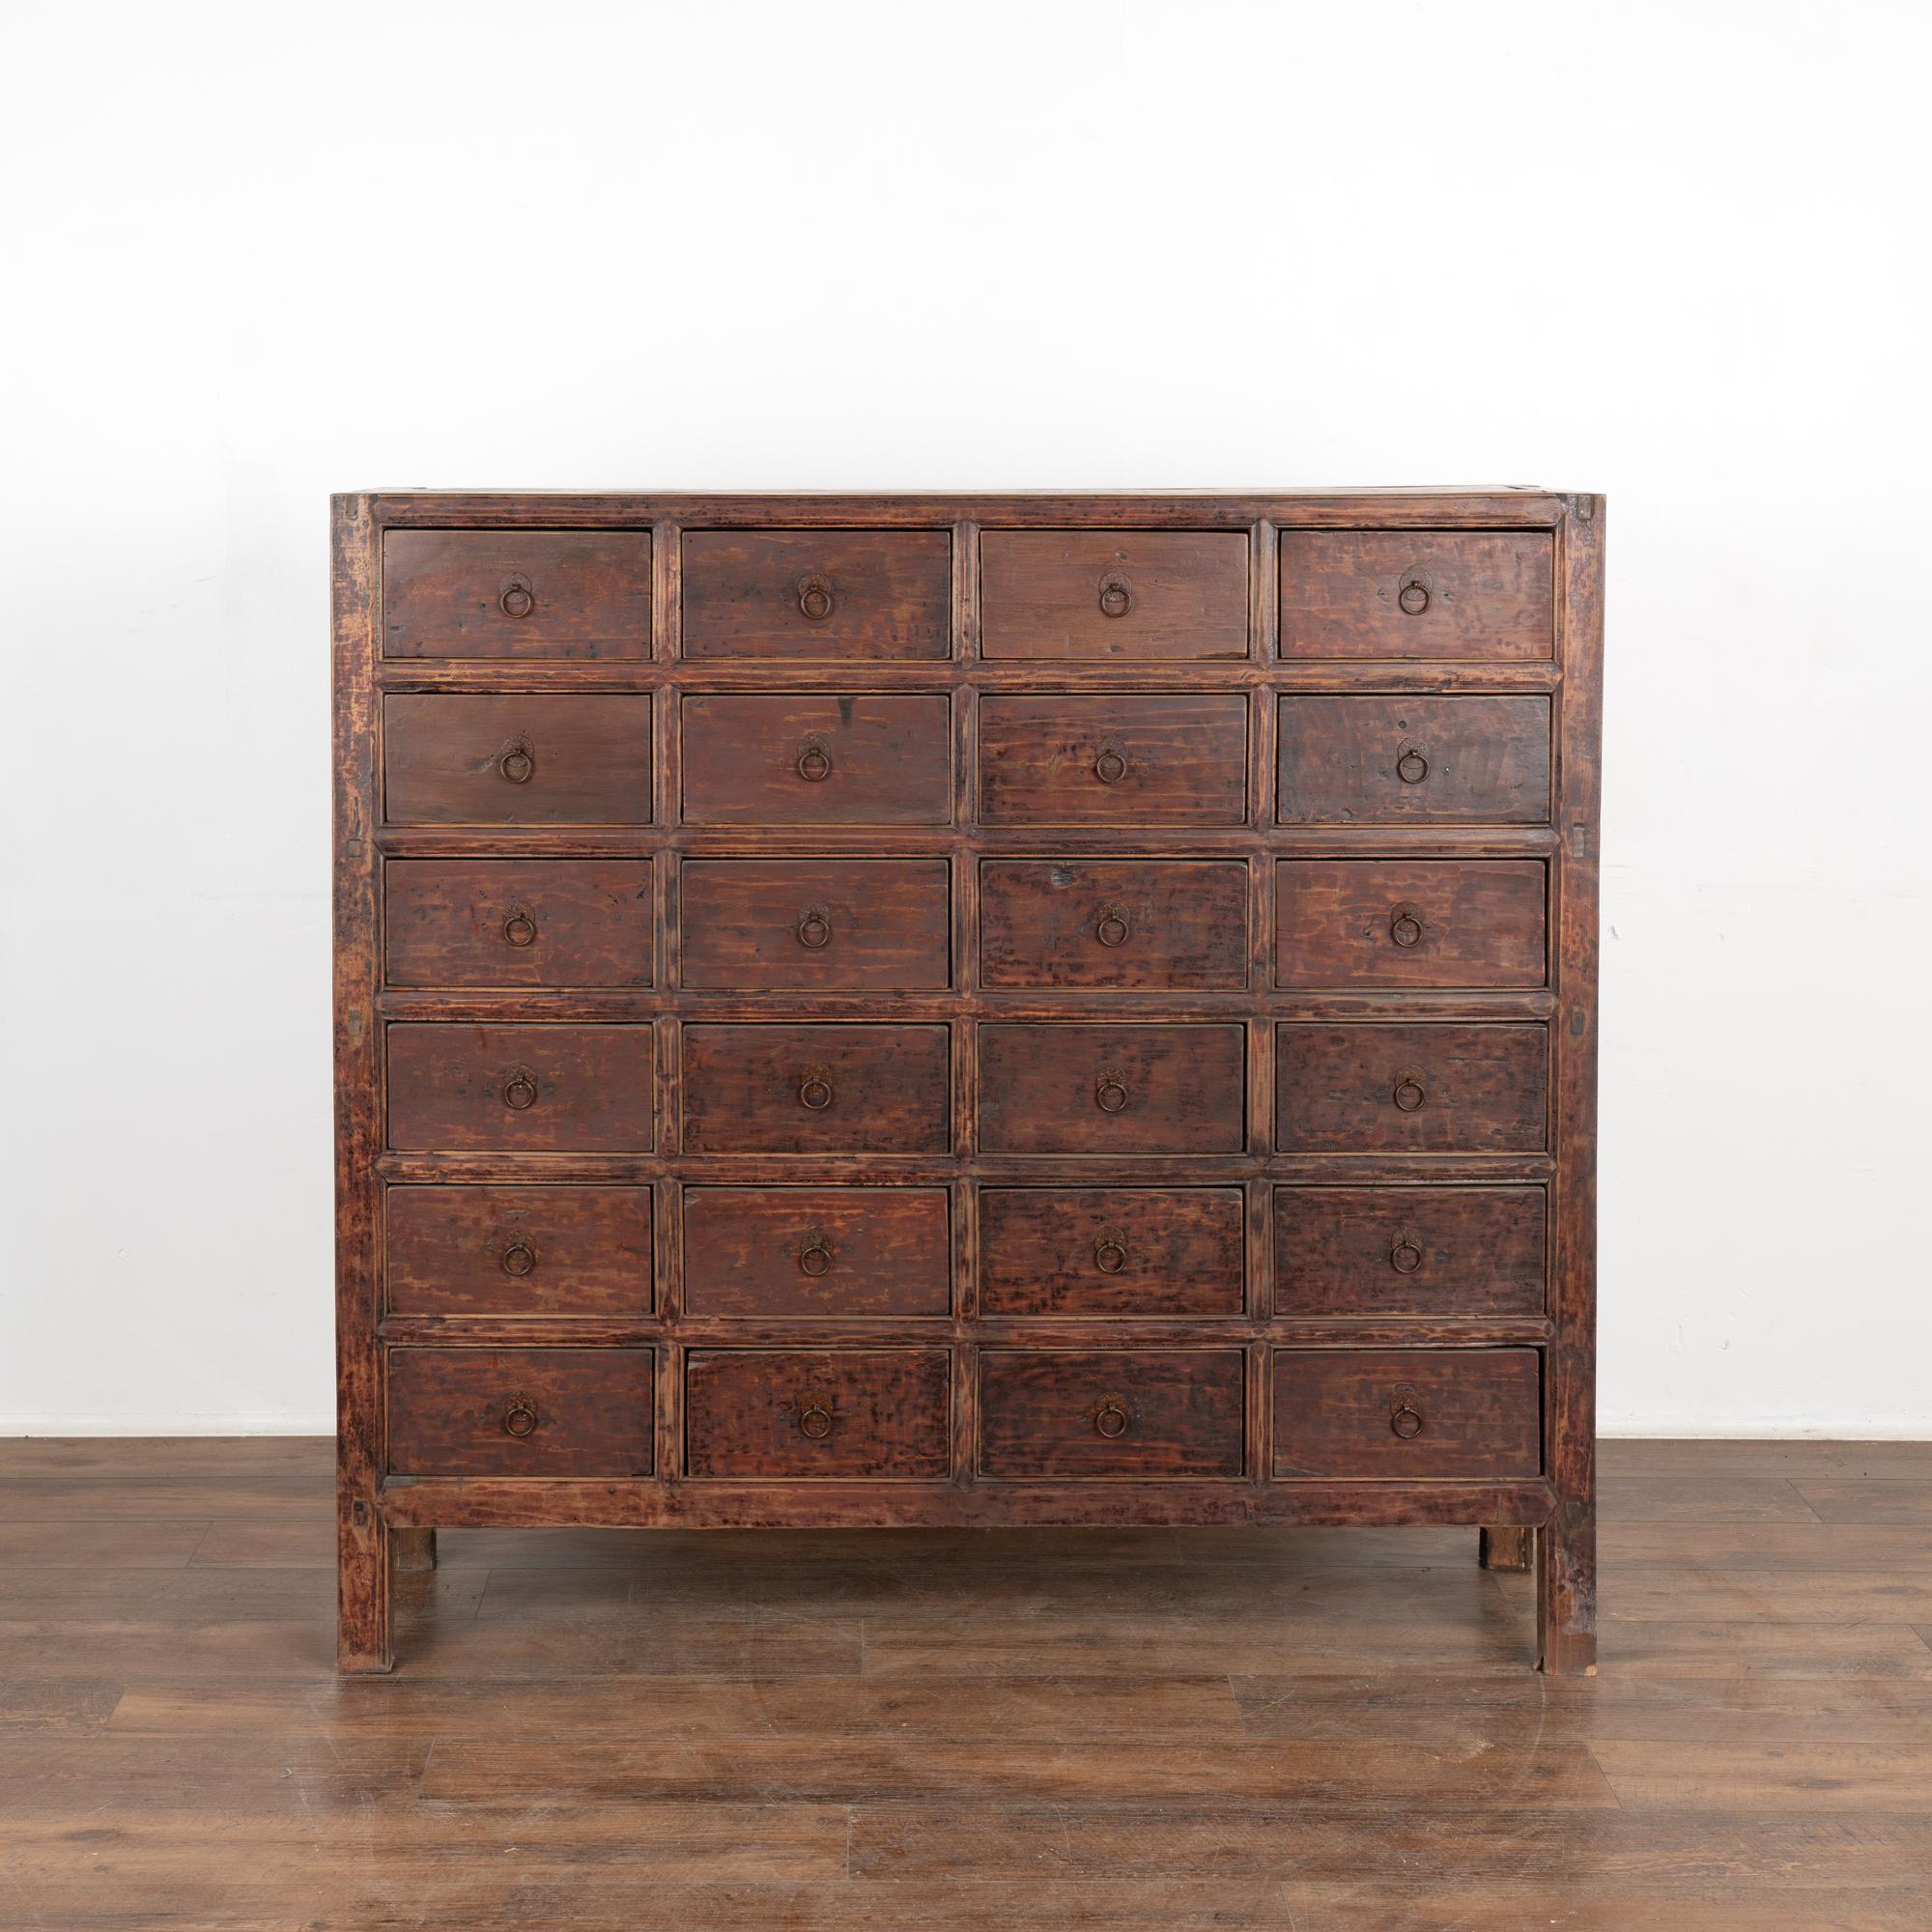 Chinese Apothecary Chest of 24 Drawers, circa 1820-40 In Good Condition For Sale In Round Top, TX